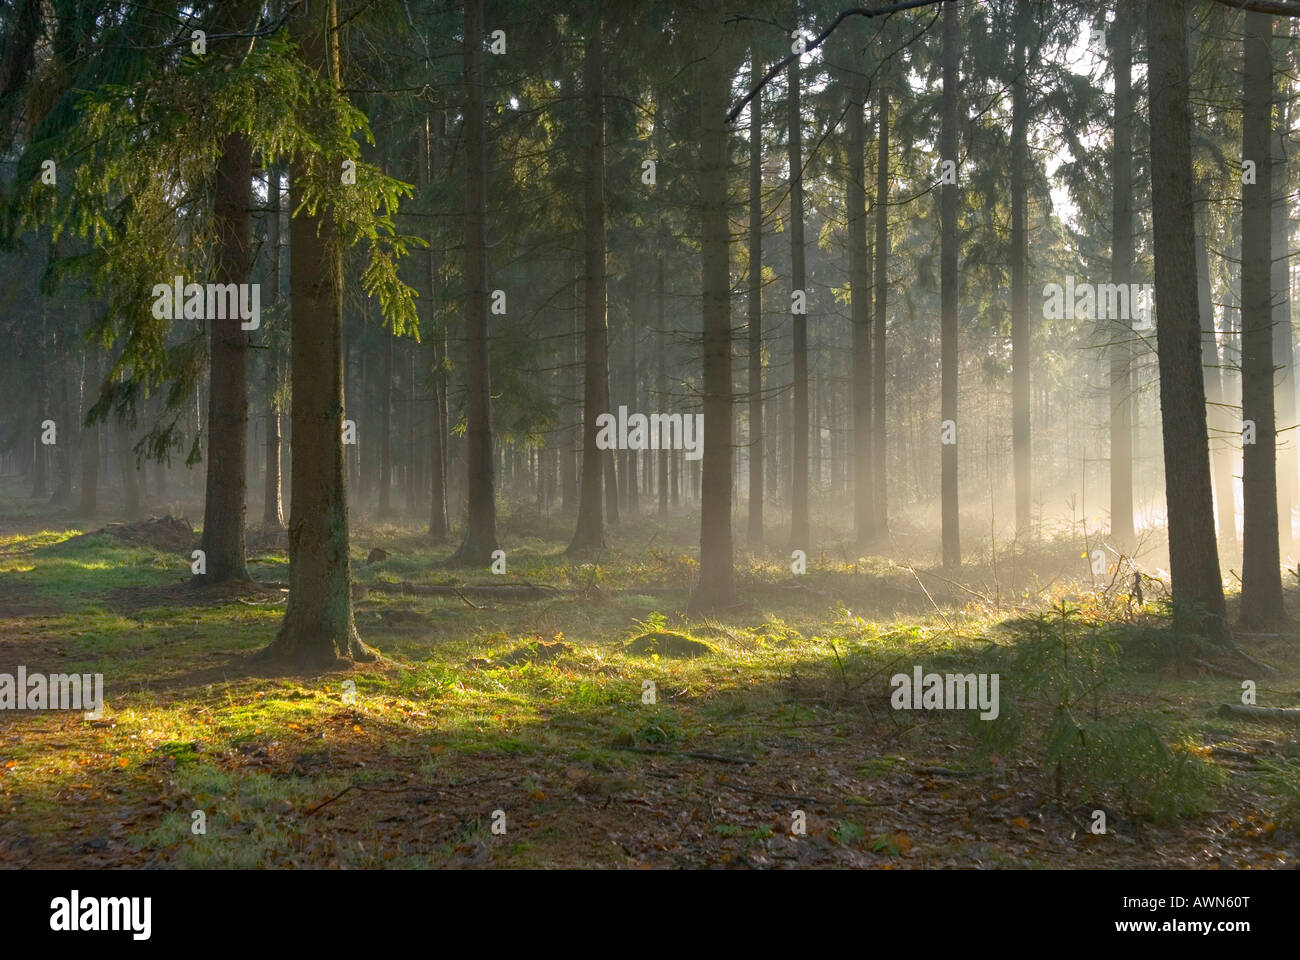 Sunlight and shadows in a forest Stock Photo